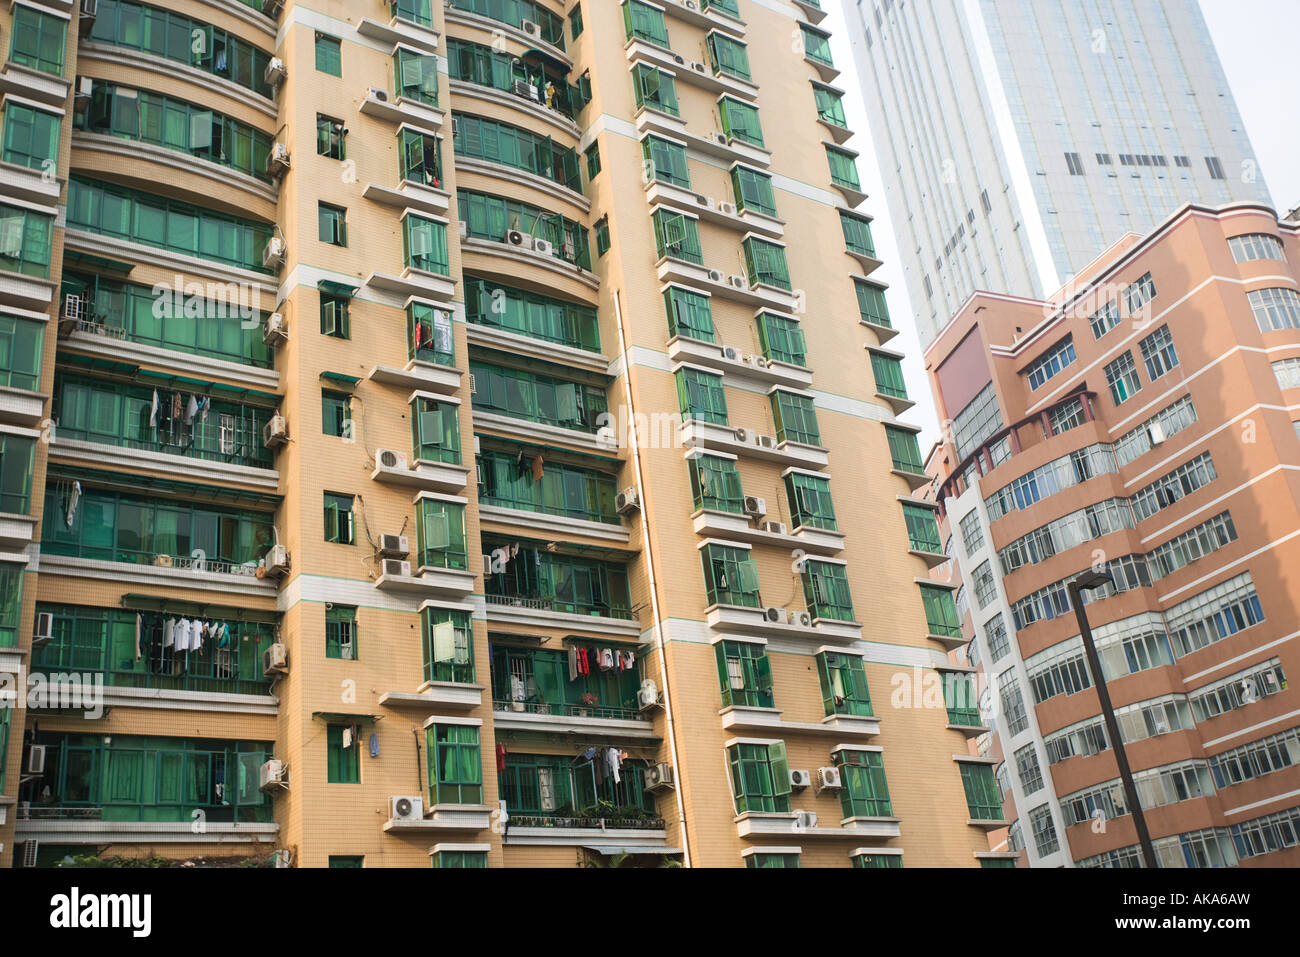 China, Guangdong Province, Guangzhou, high rise apartment building with green glass windows Stock Photo